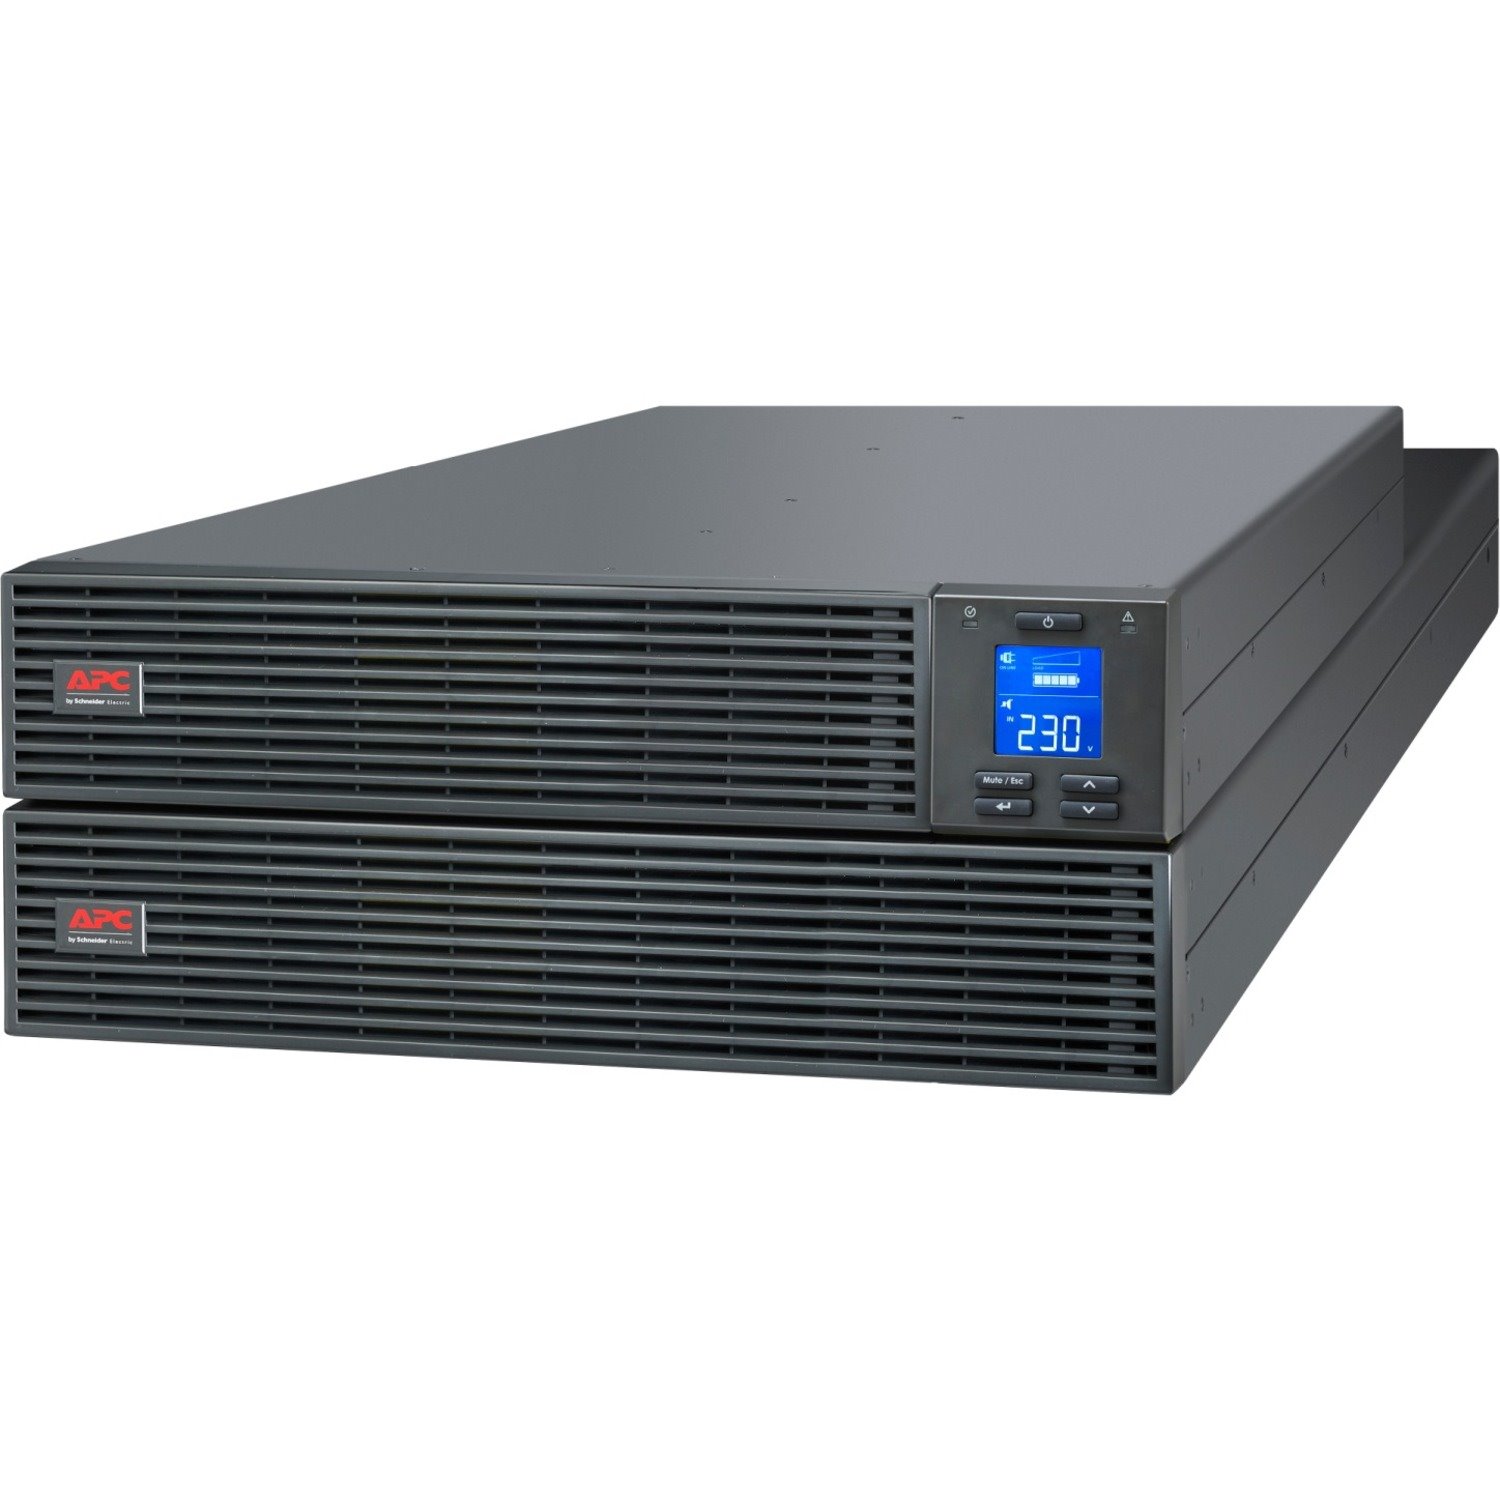 APC by Schneider Electric Easy UPS SRV10KRI Double Conversion Online UPS - 10 kVA - Single Phase